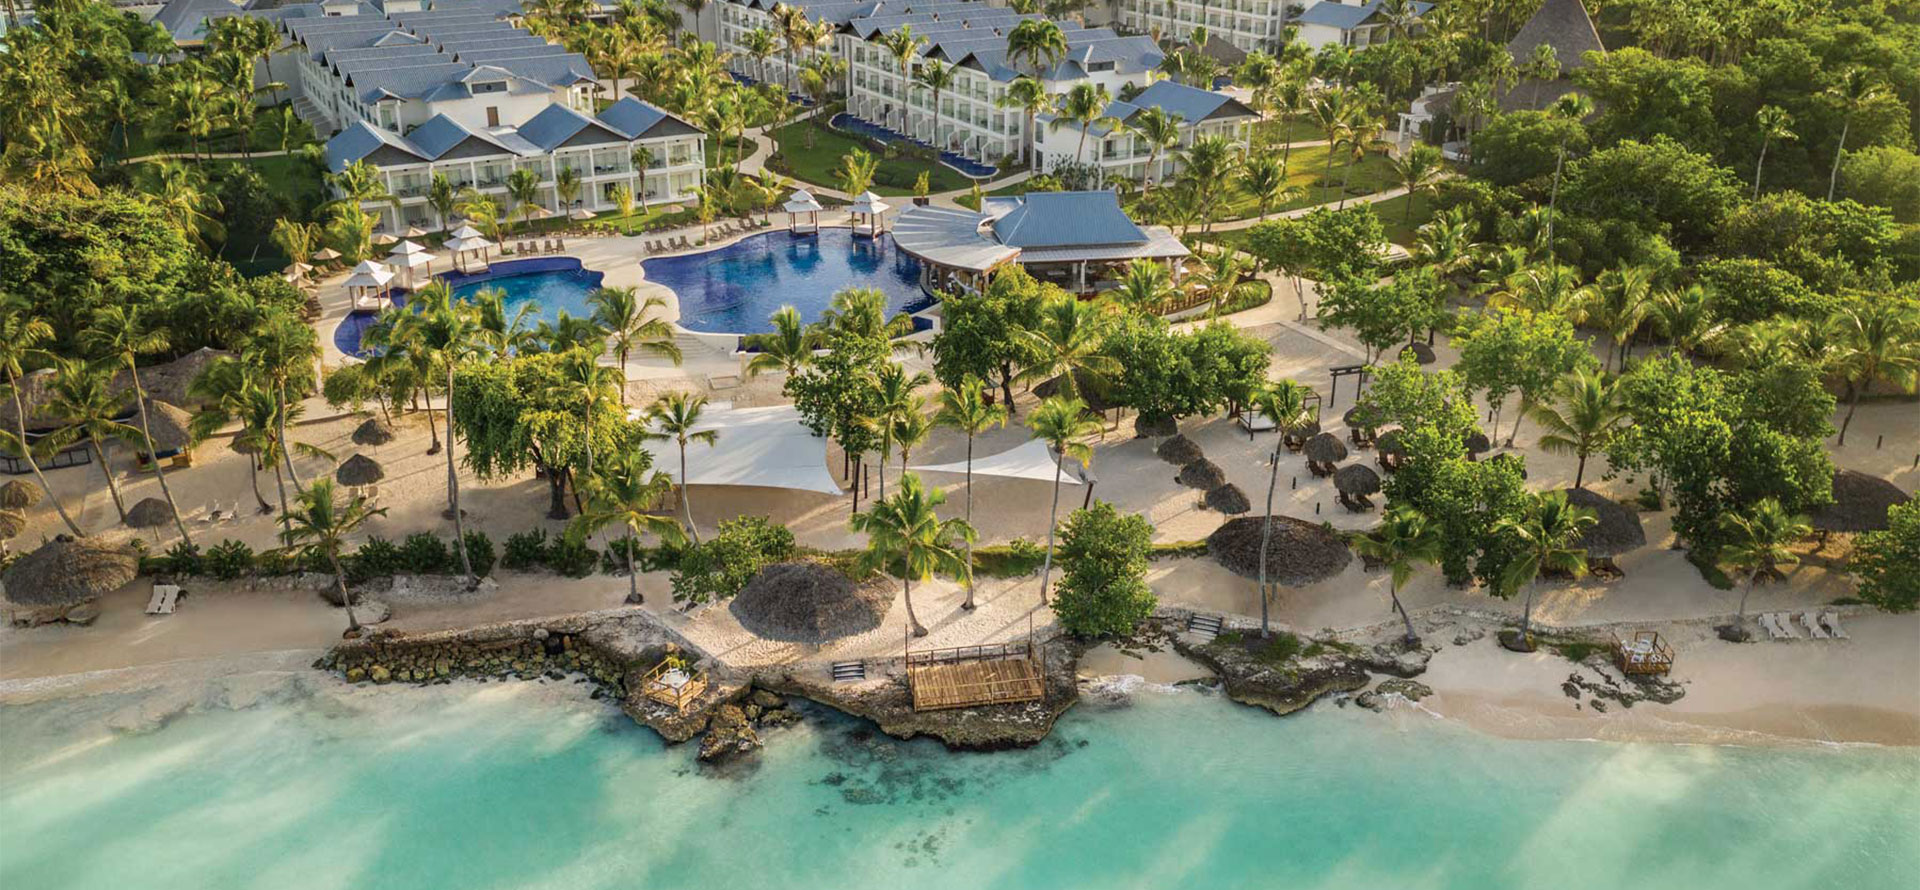 Beach in Dominican Republic all-inclusive adults only resort.